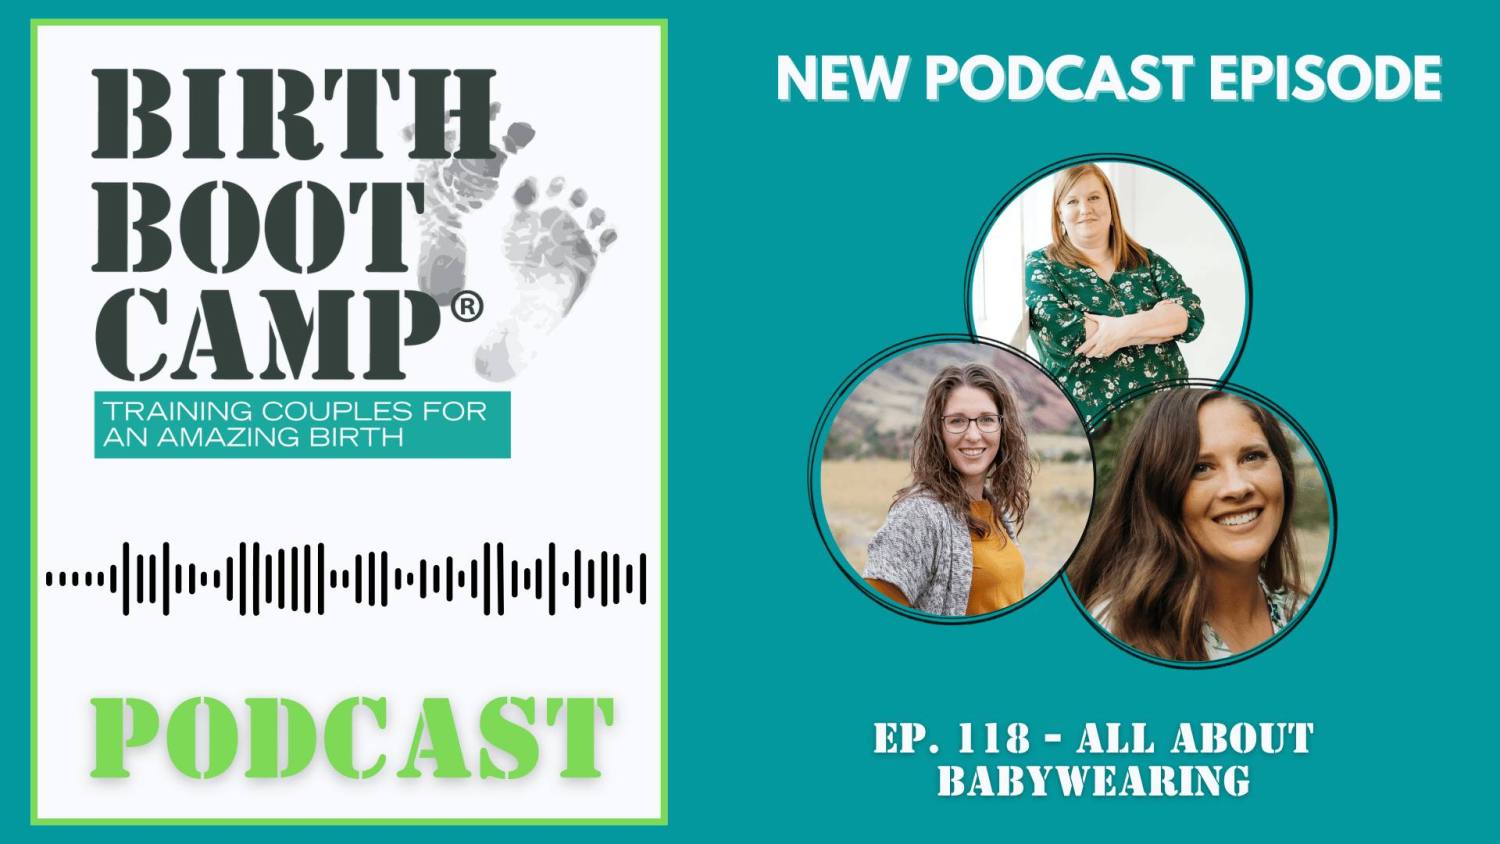 Text: Birth Boot Camp Podcast New Episode 118 All About Babywearing. Image of the Birth Boot Camp HQ Team starting at the top, Hollie Hauptly, Liana Wolfe, and Megan Busk